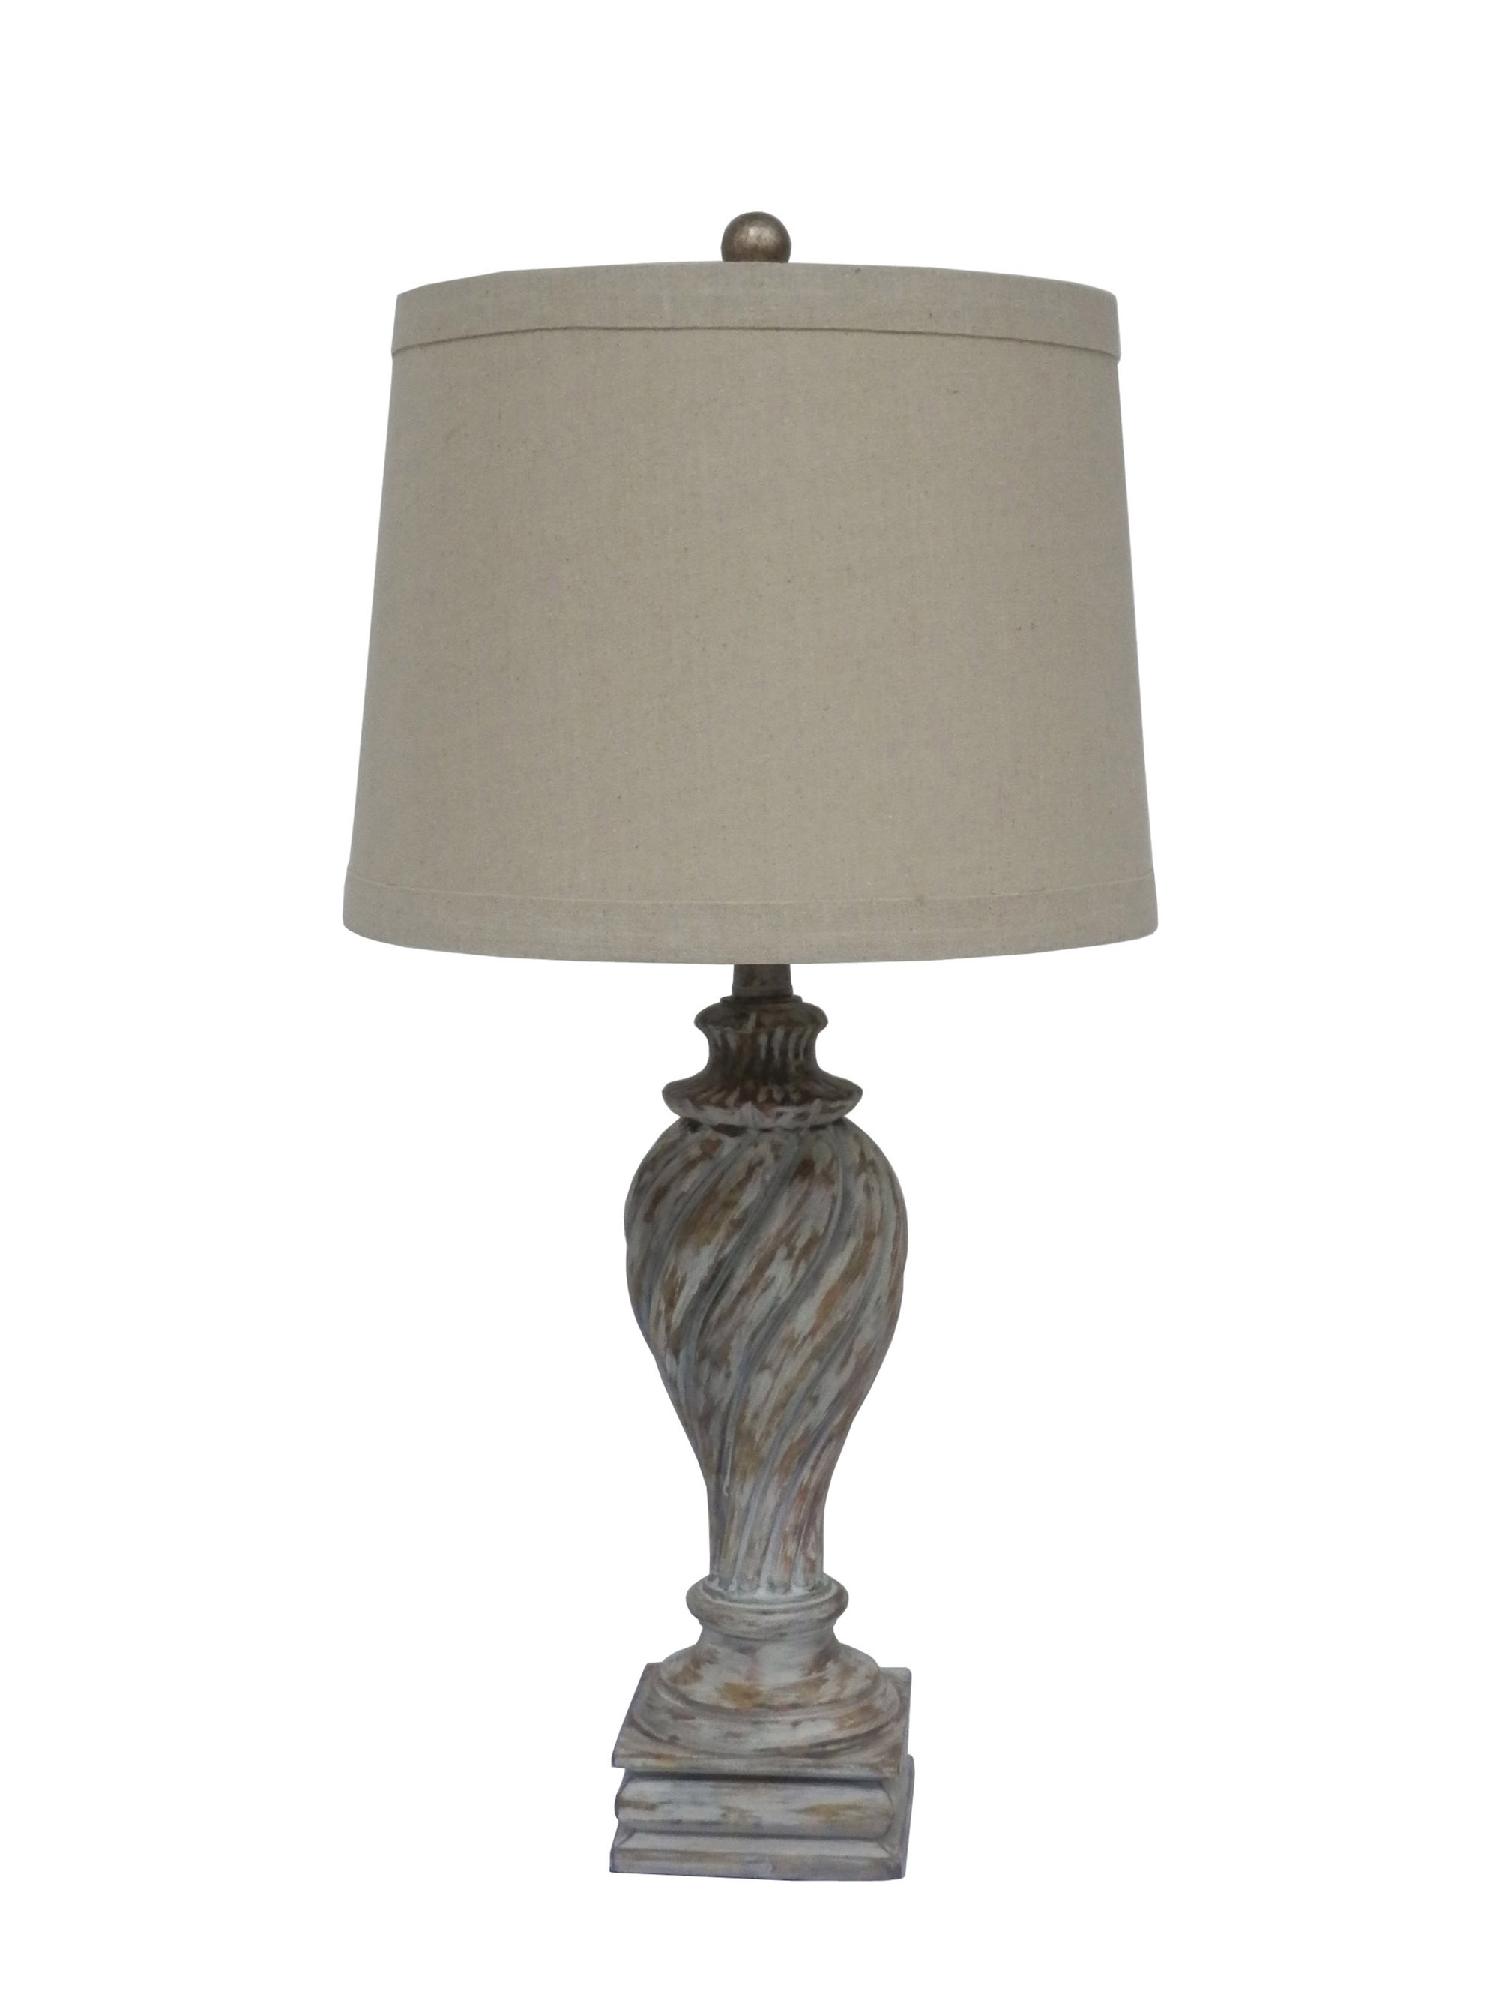 28" Resin Table Lamp with Antique White Finish.